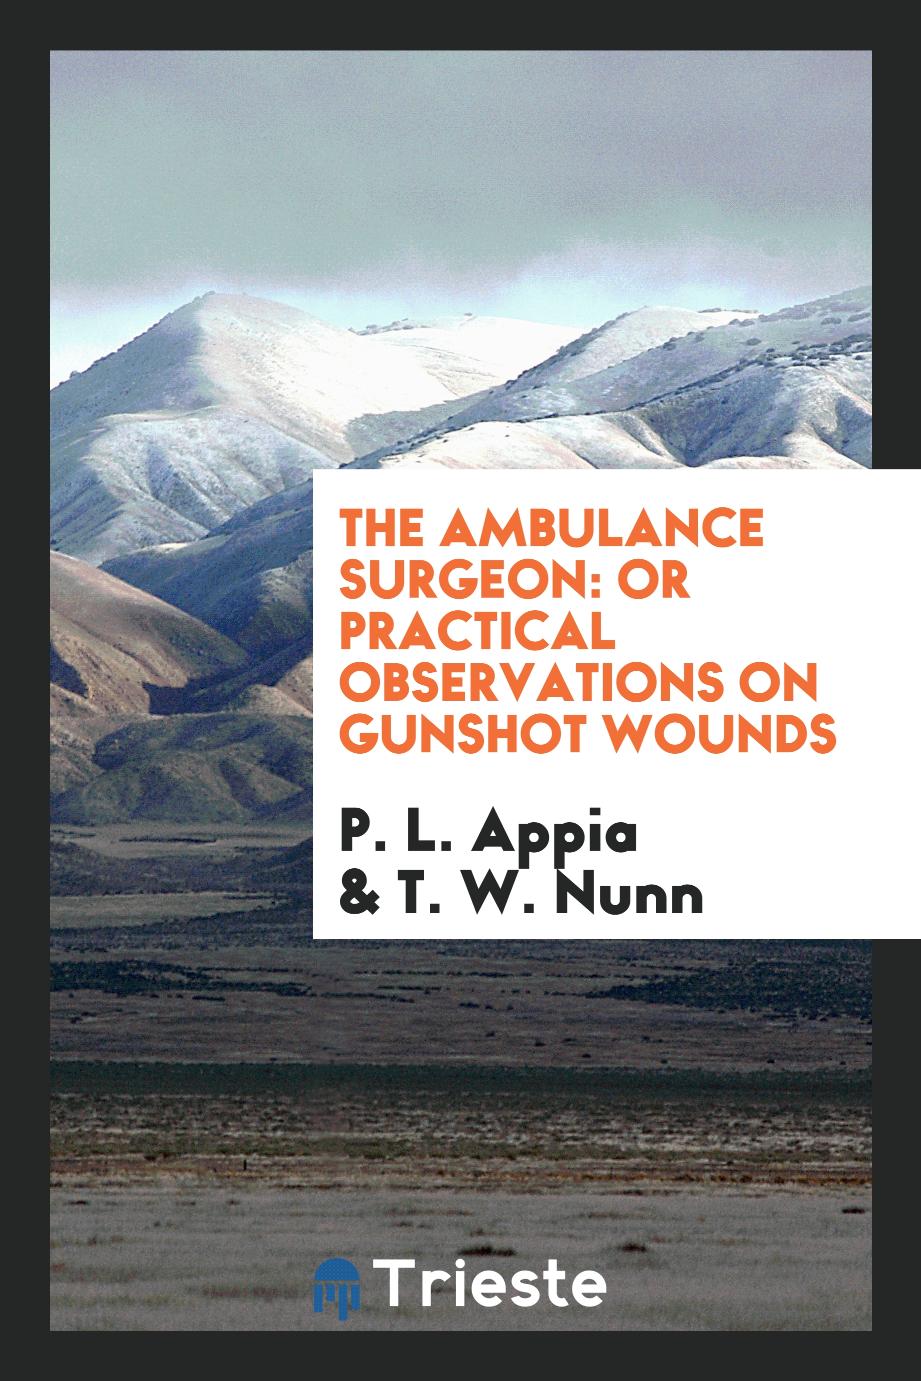 The Ambulance Surgeon: Or Practical Observations on Gunshot Wounds